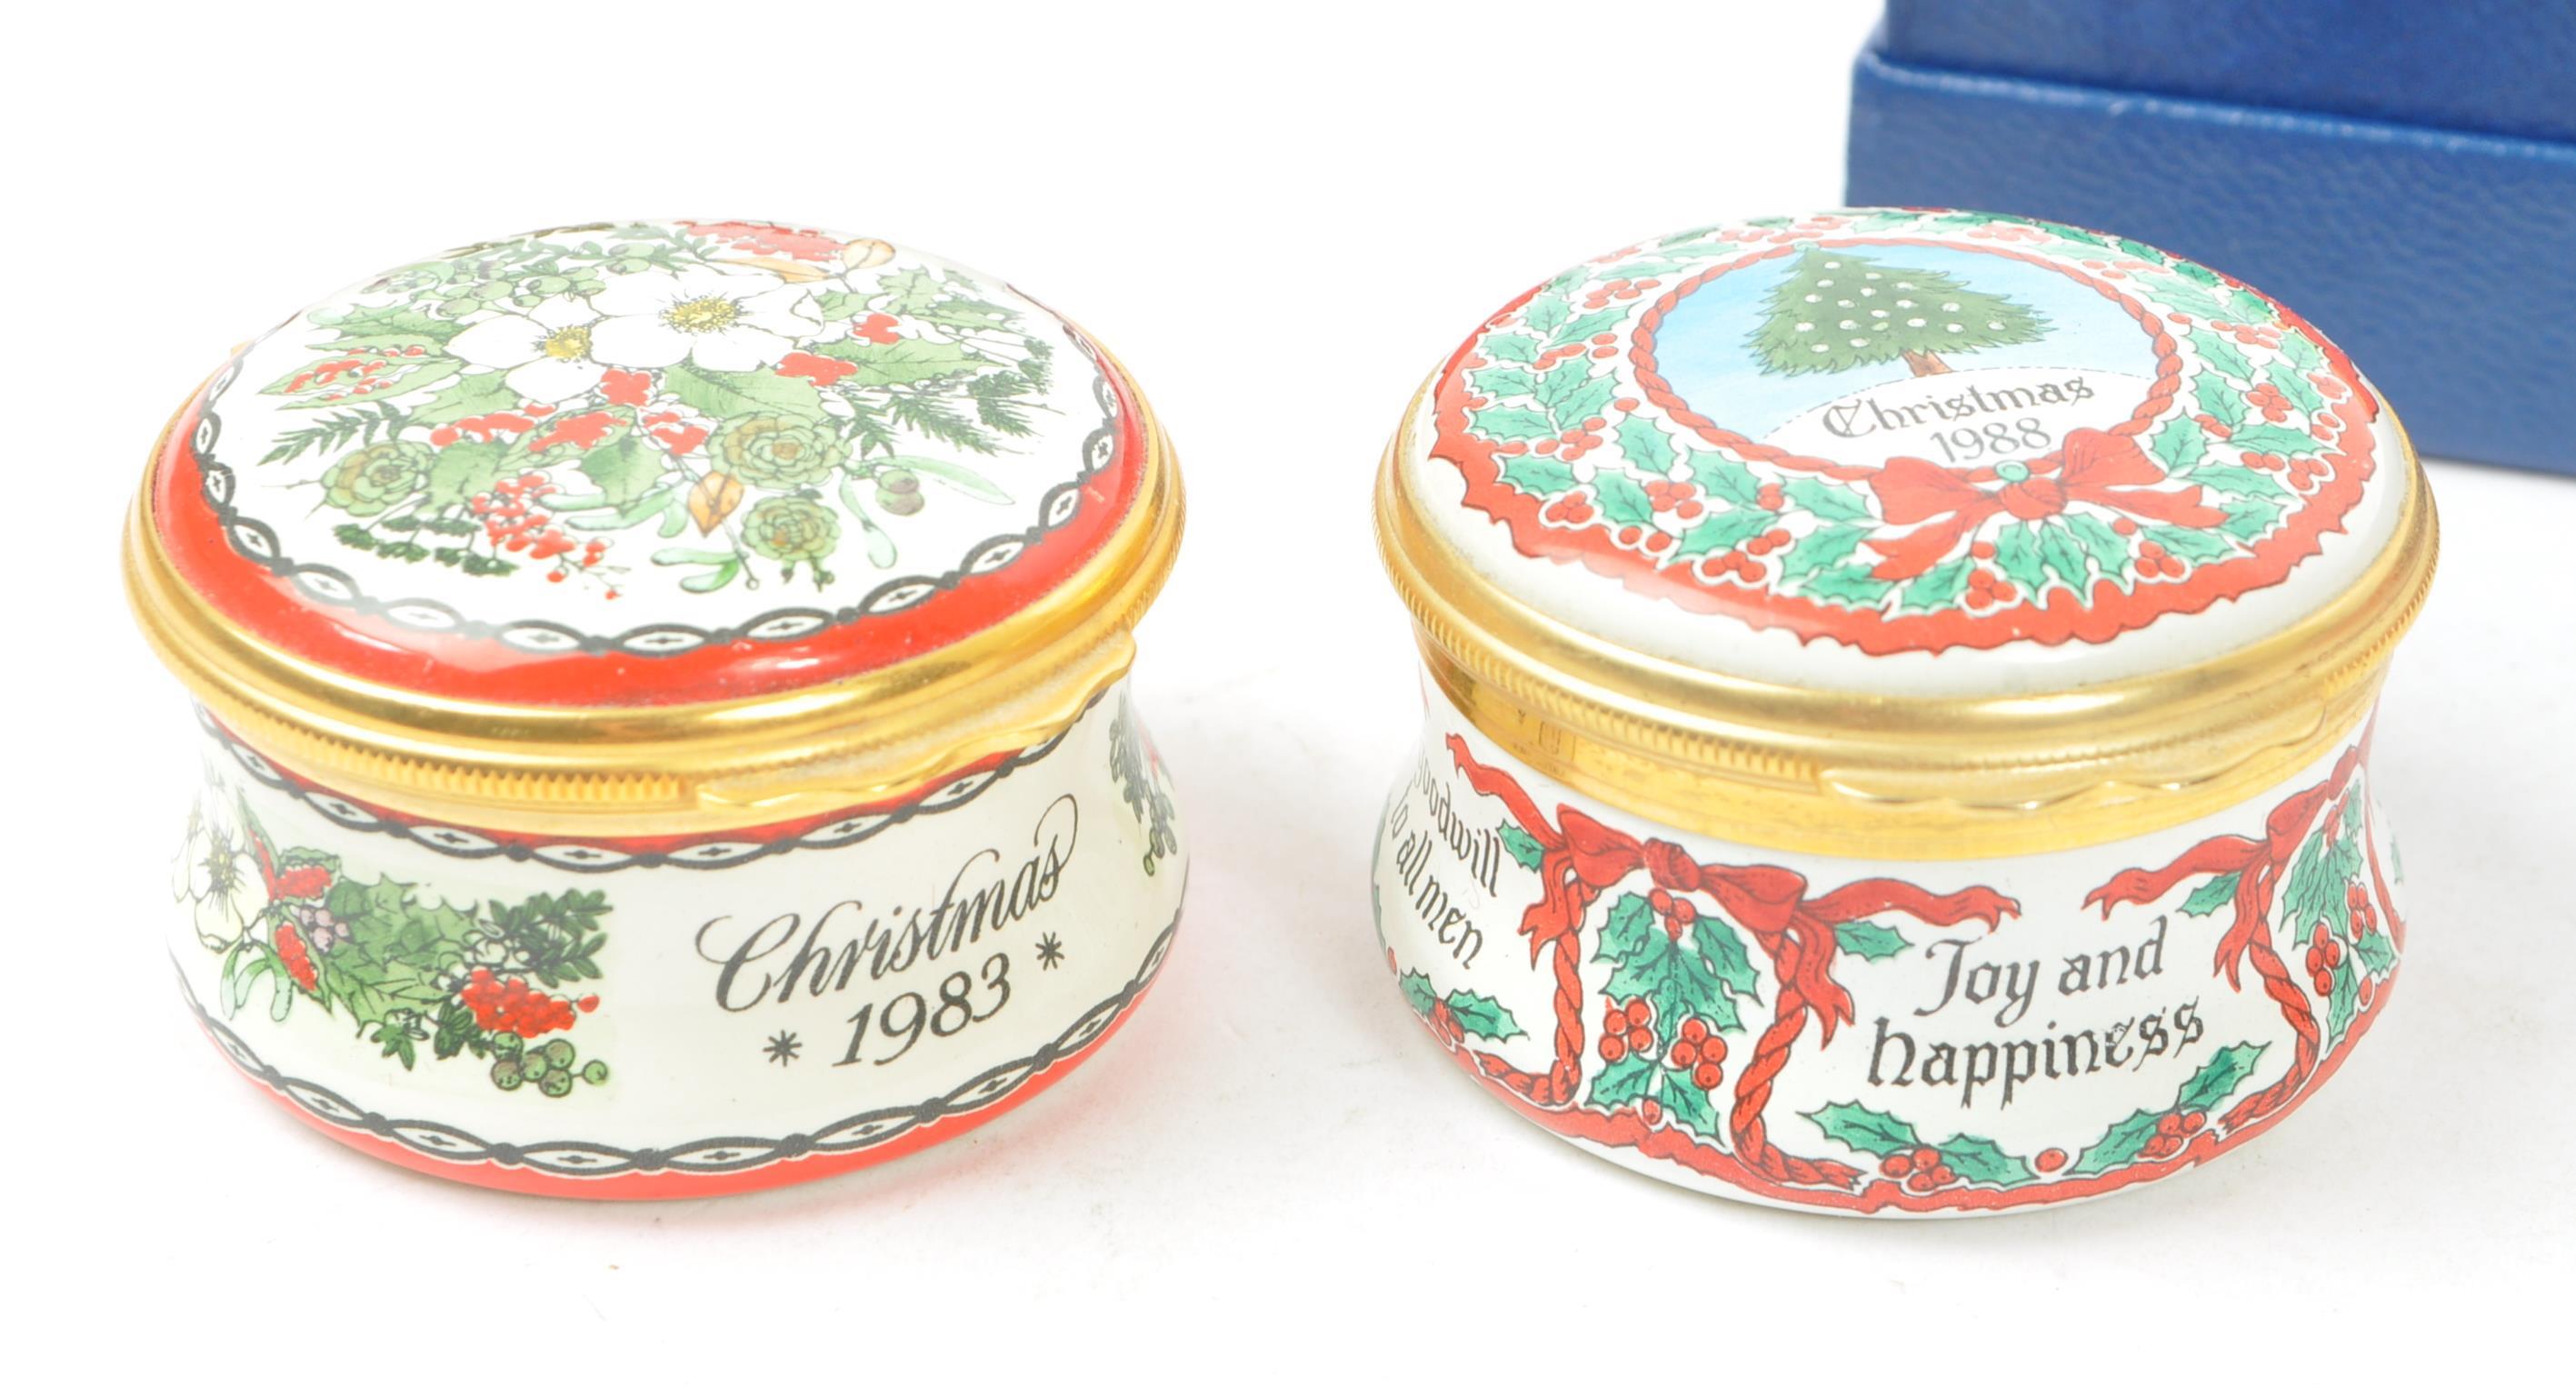 HALCYON DAYS ENAMELS - COLLECTION OF 1980S ENAMEL BOXES - Image 2 of 6